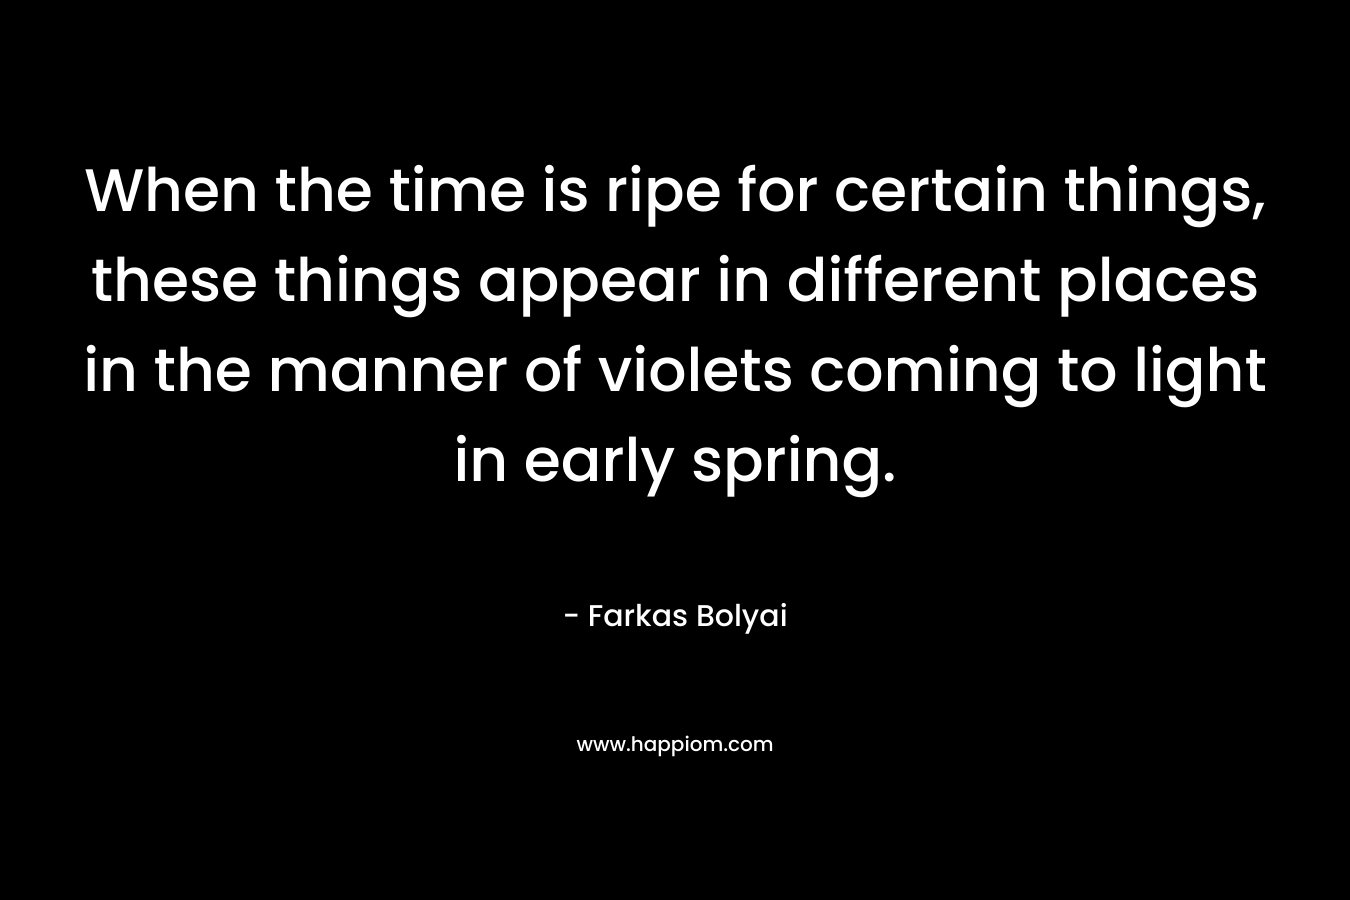 When the time is ripe for certain things, these things appear in different places in the manner of violets coming to light in early spring.